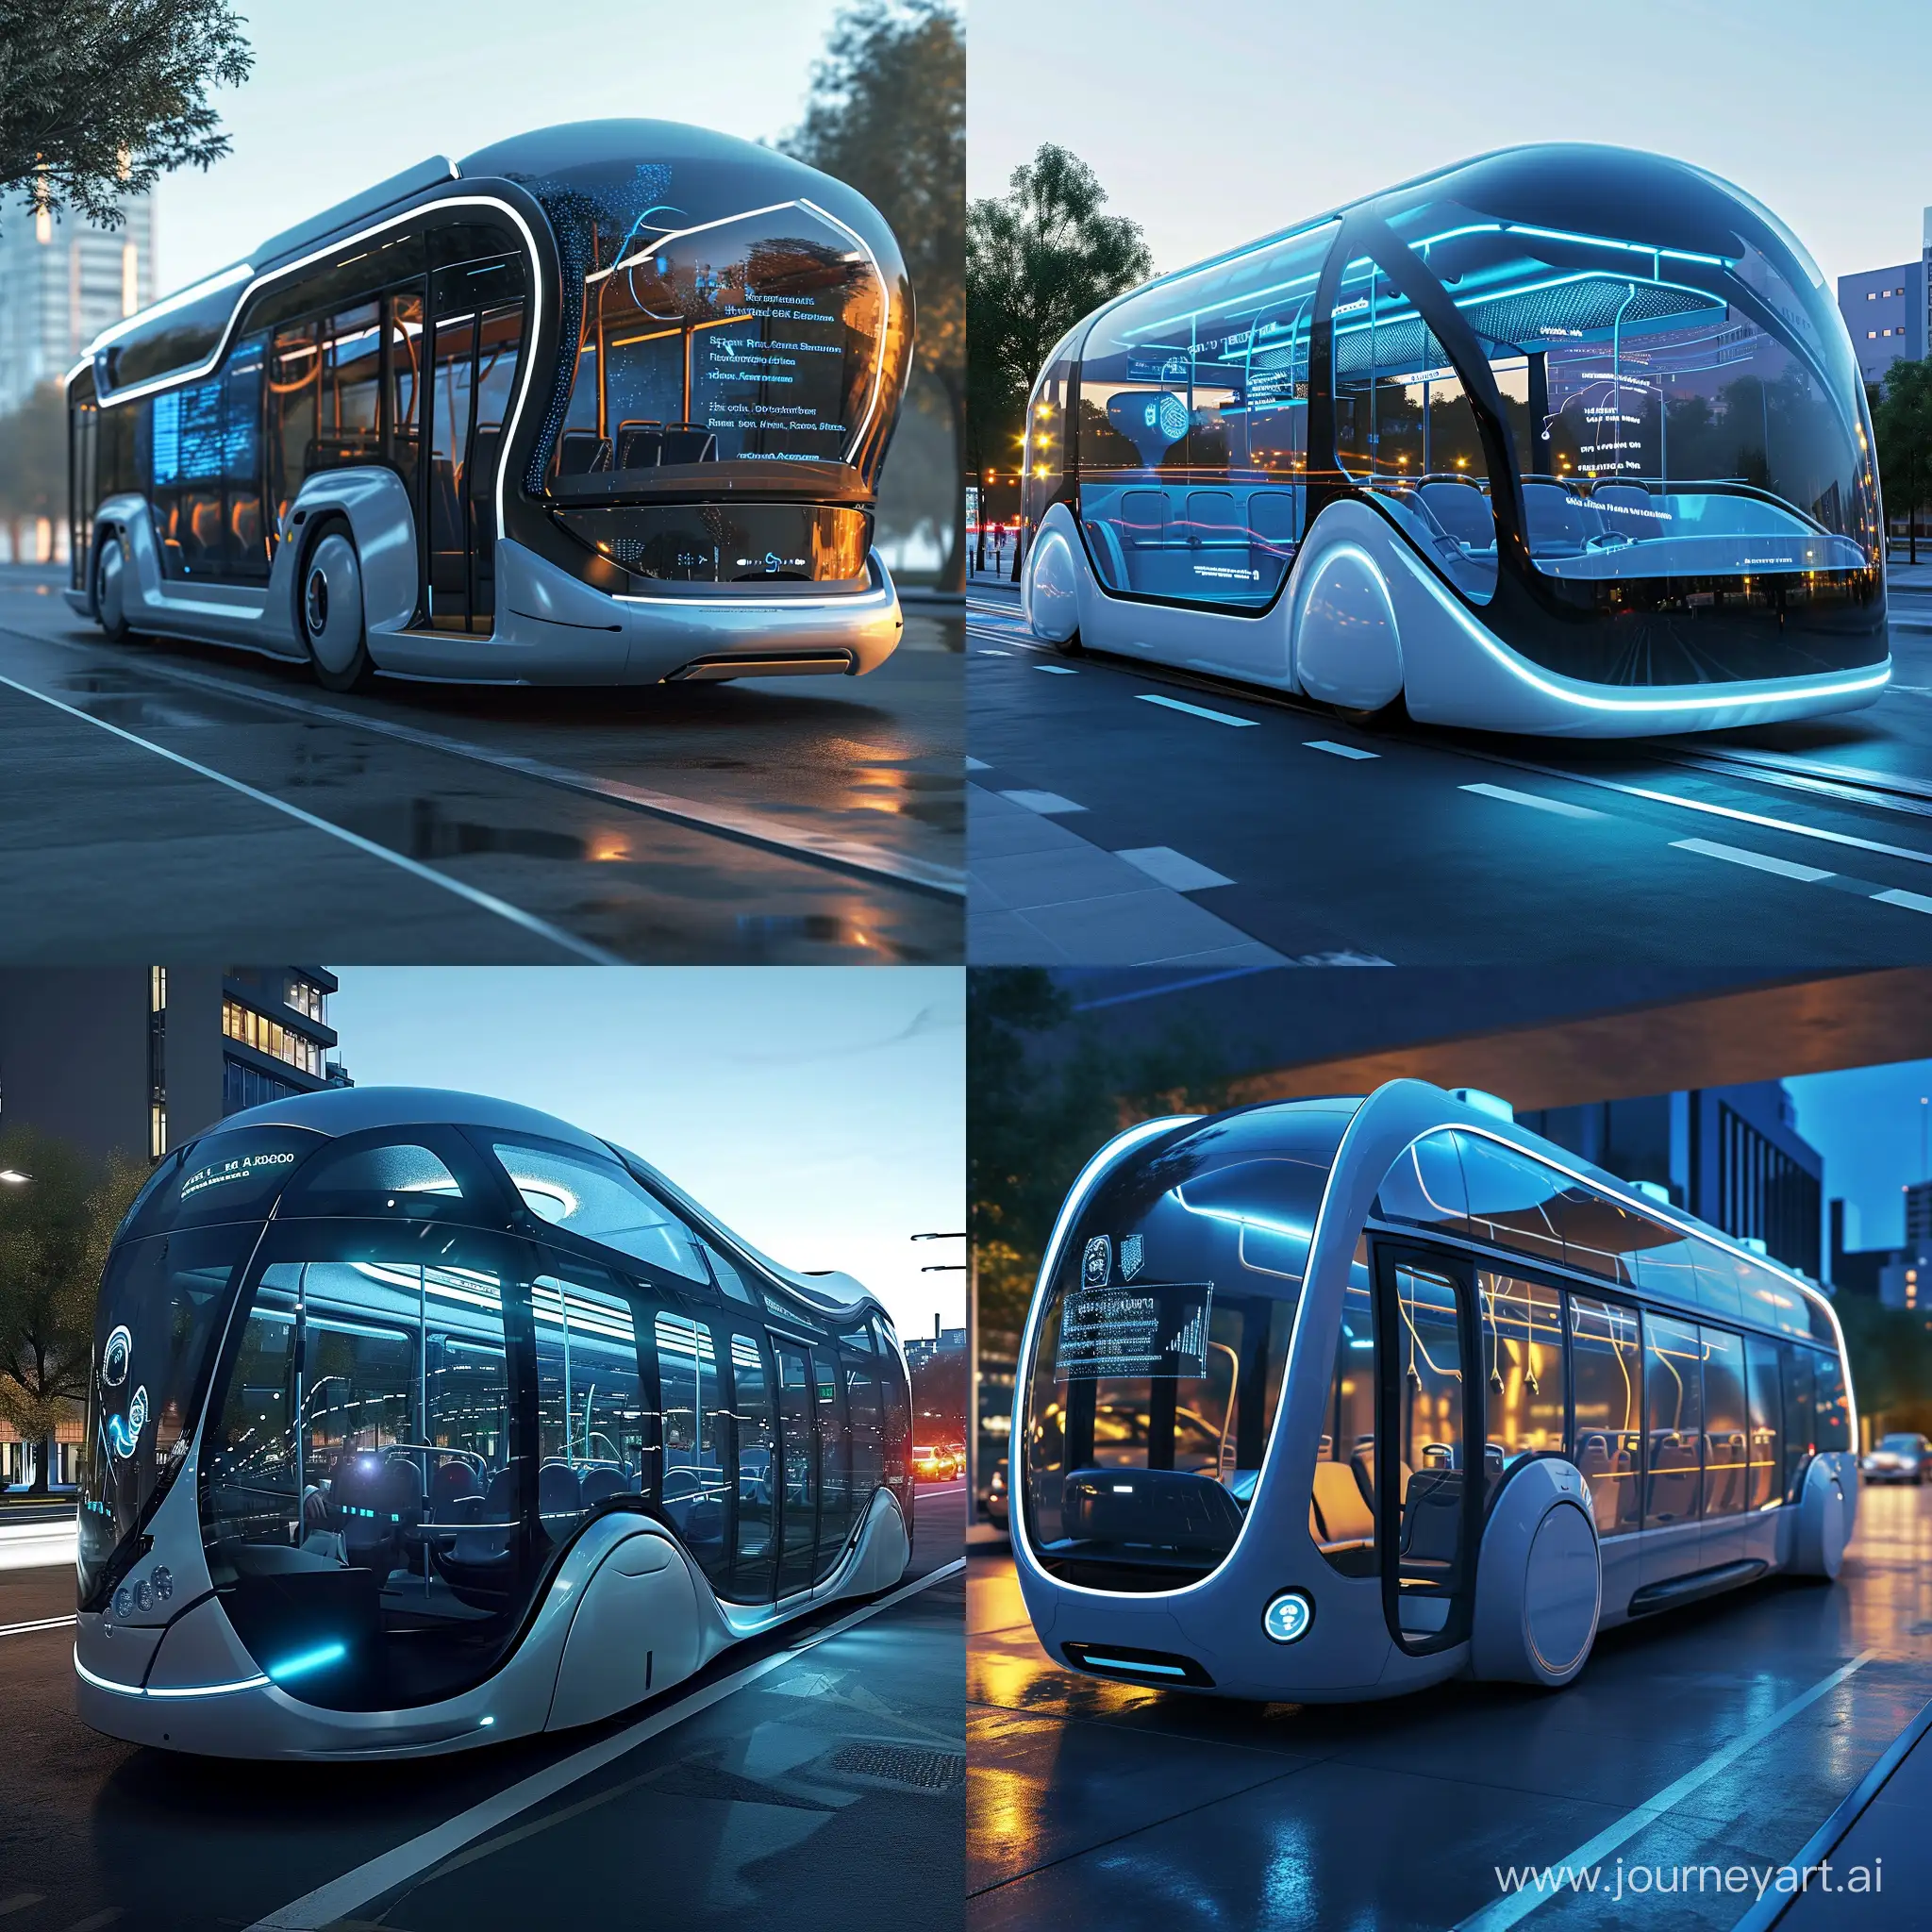 Futuristic-Autonomous-Bus-with-Holographic-Displays-and-Smart-Comfort-Features